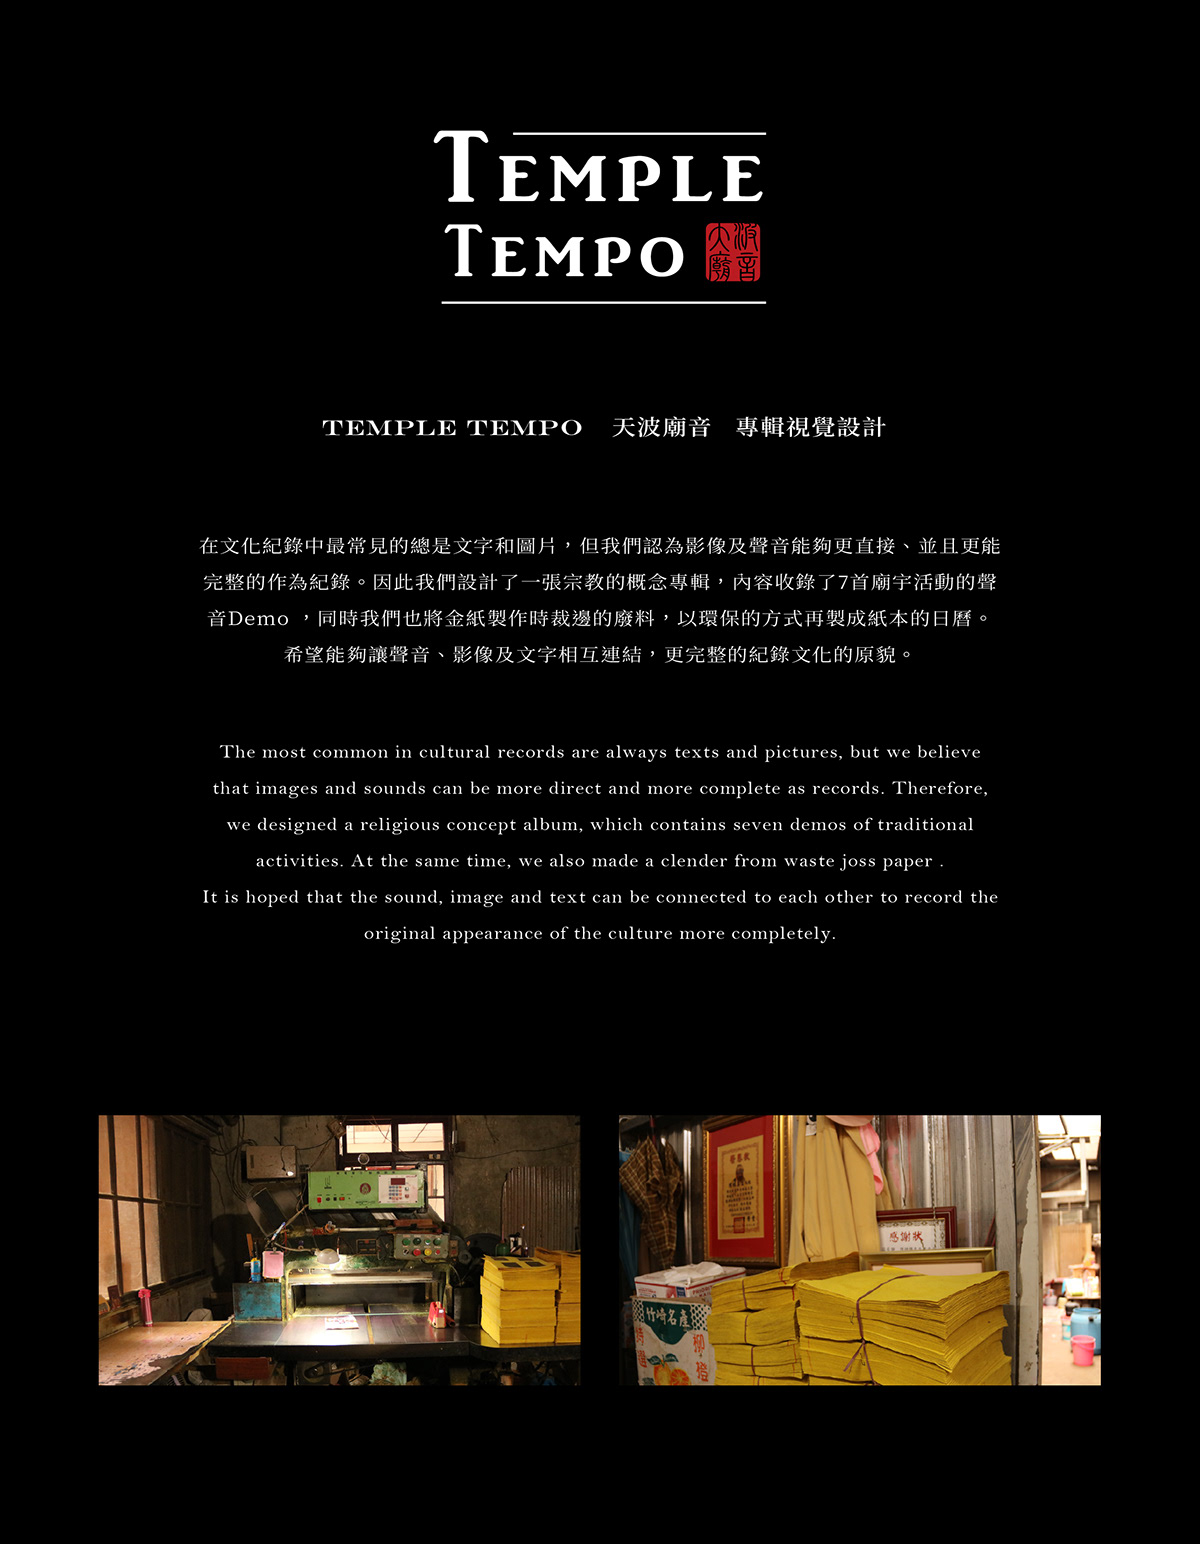 Album sounds graphic design  noise temple music chinese 廟宇 文化 金紙